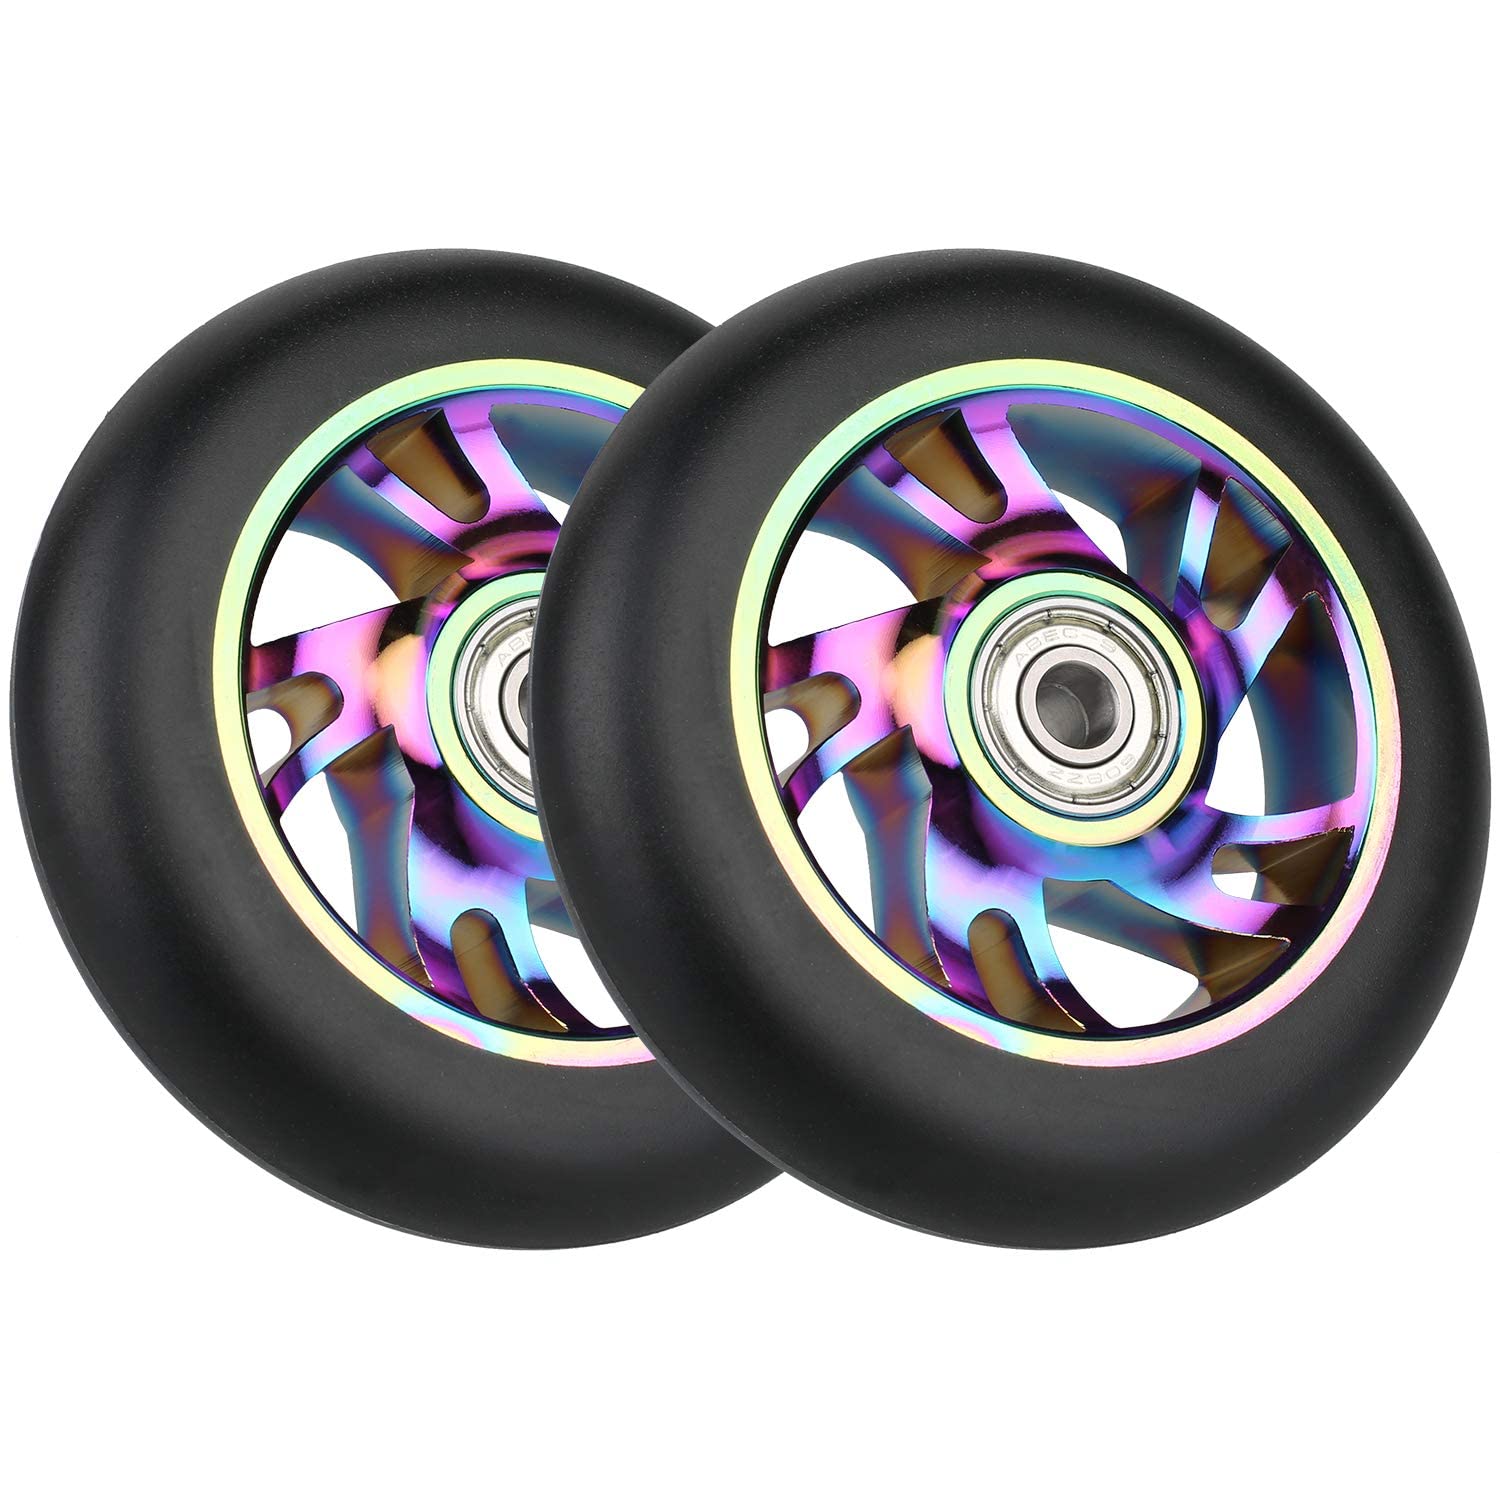 VOKUL 110 mm Pro Scooter Replacement Wheels - Kickscooter Wheels Suitable for Razor/Cox/Albott and Most Freestyle Scooters - Thickened PVC Stunt Scooter Wheels with ABEC-9 Bearings, Pack of 2 von VOKUL